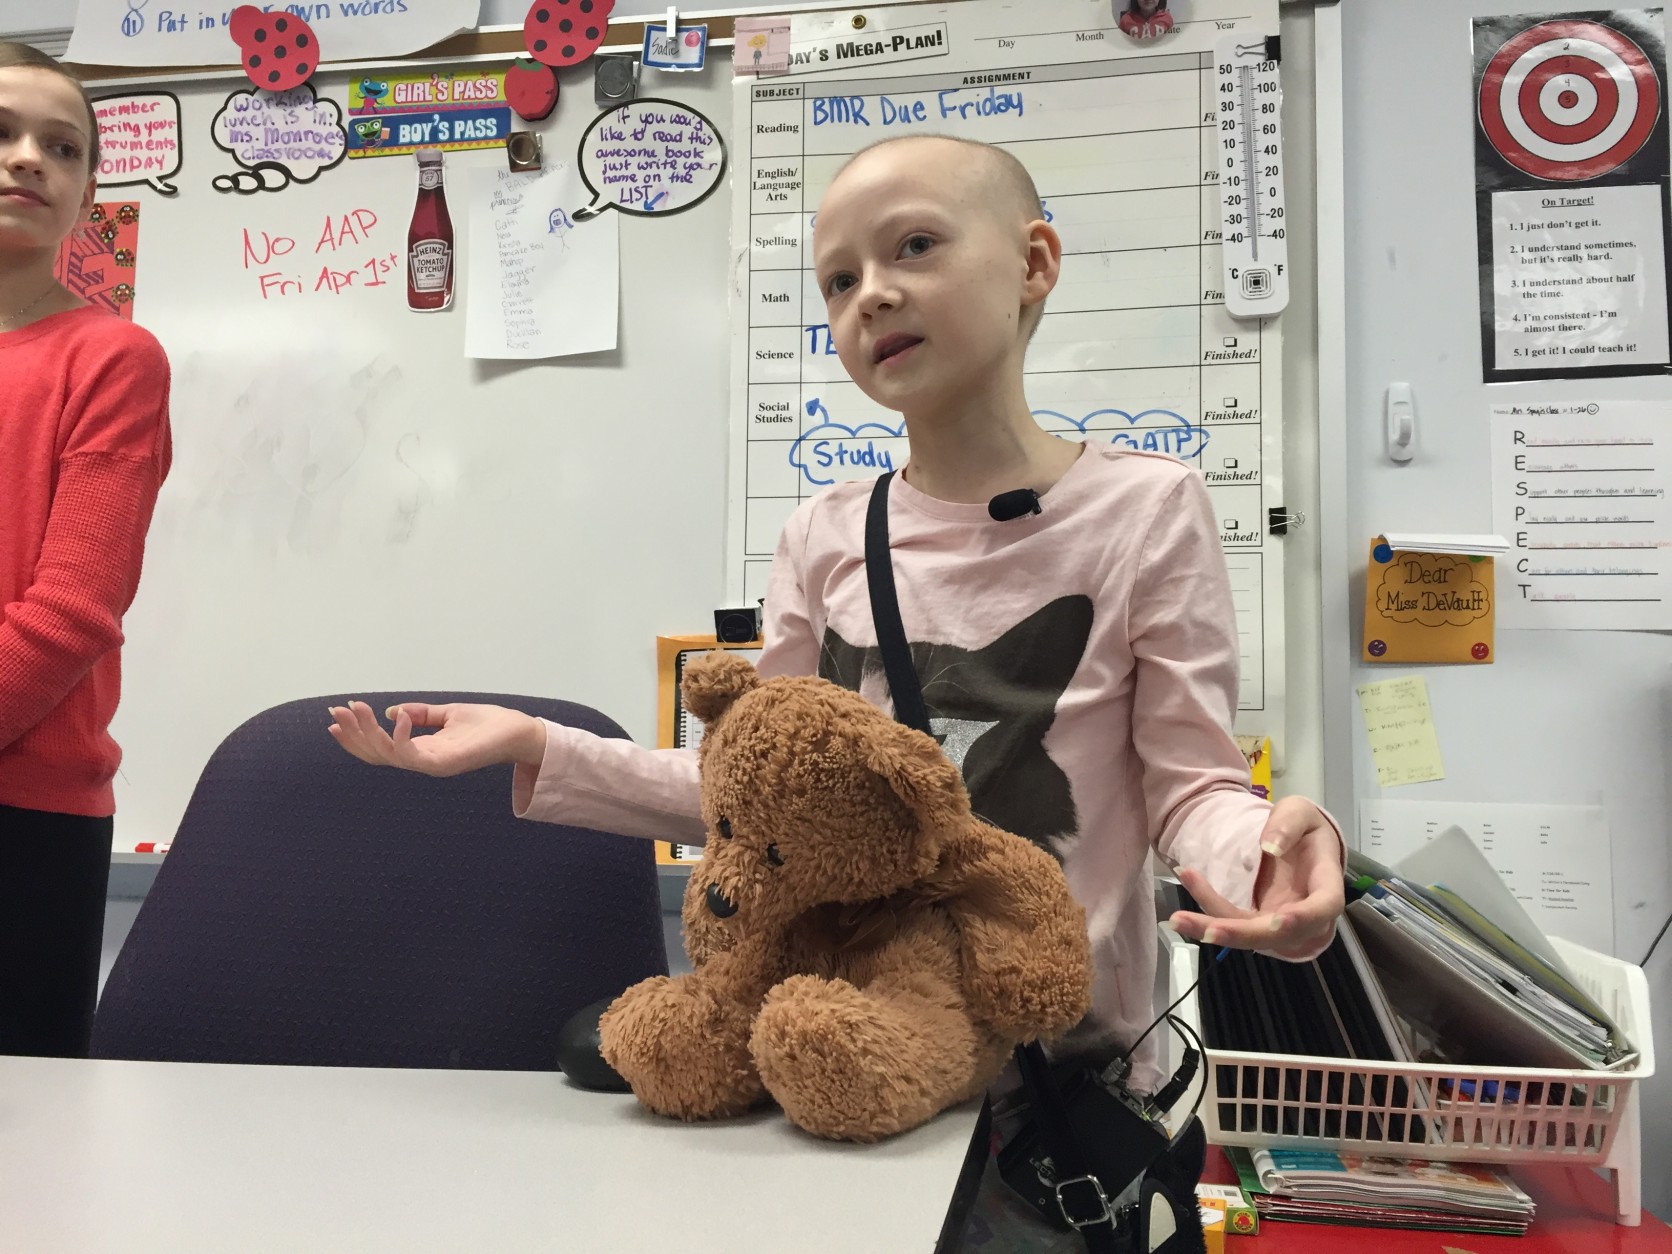 Eleven-year-old Sadie Murata, who's battling a rare form of cancer, returned to class at Laurel Ridge Elementary for the first time in months Tuesday. She was there to encourage fellow students to make bucket lists of short and long term goals. (WTOP/Michelle Basch)